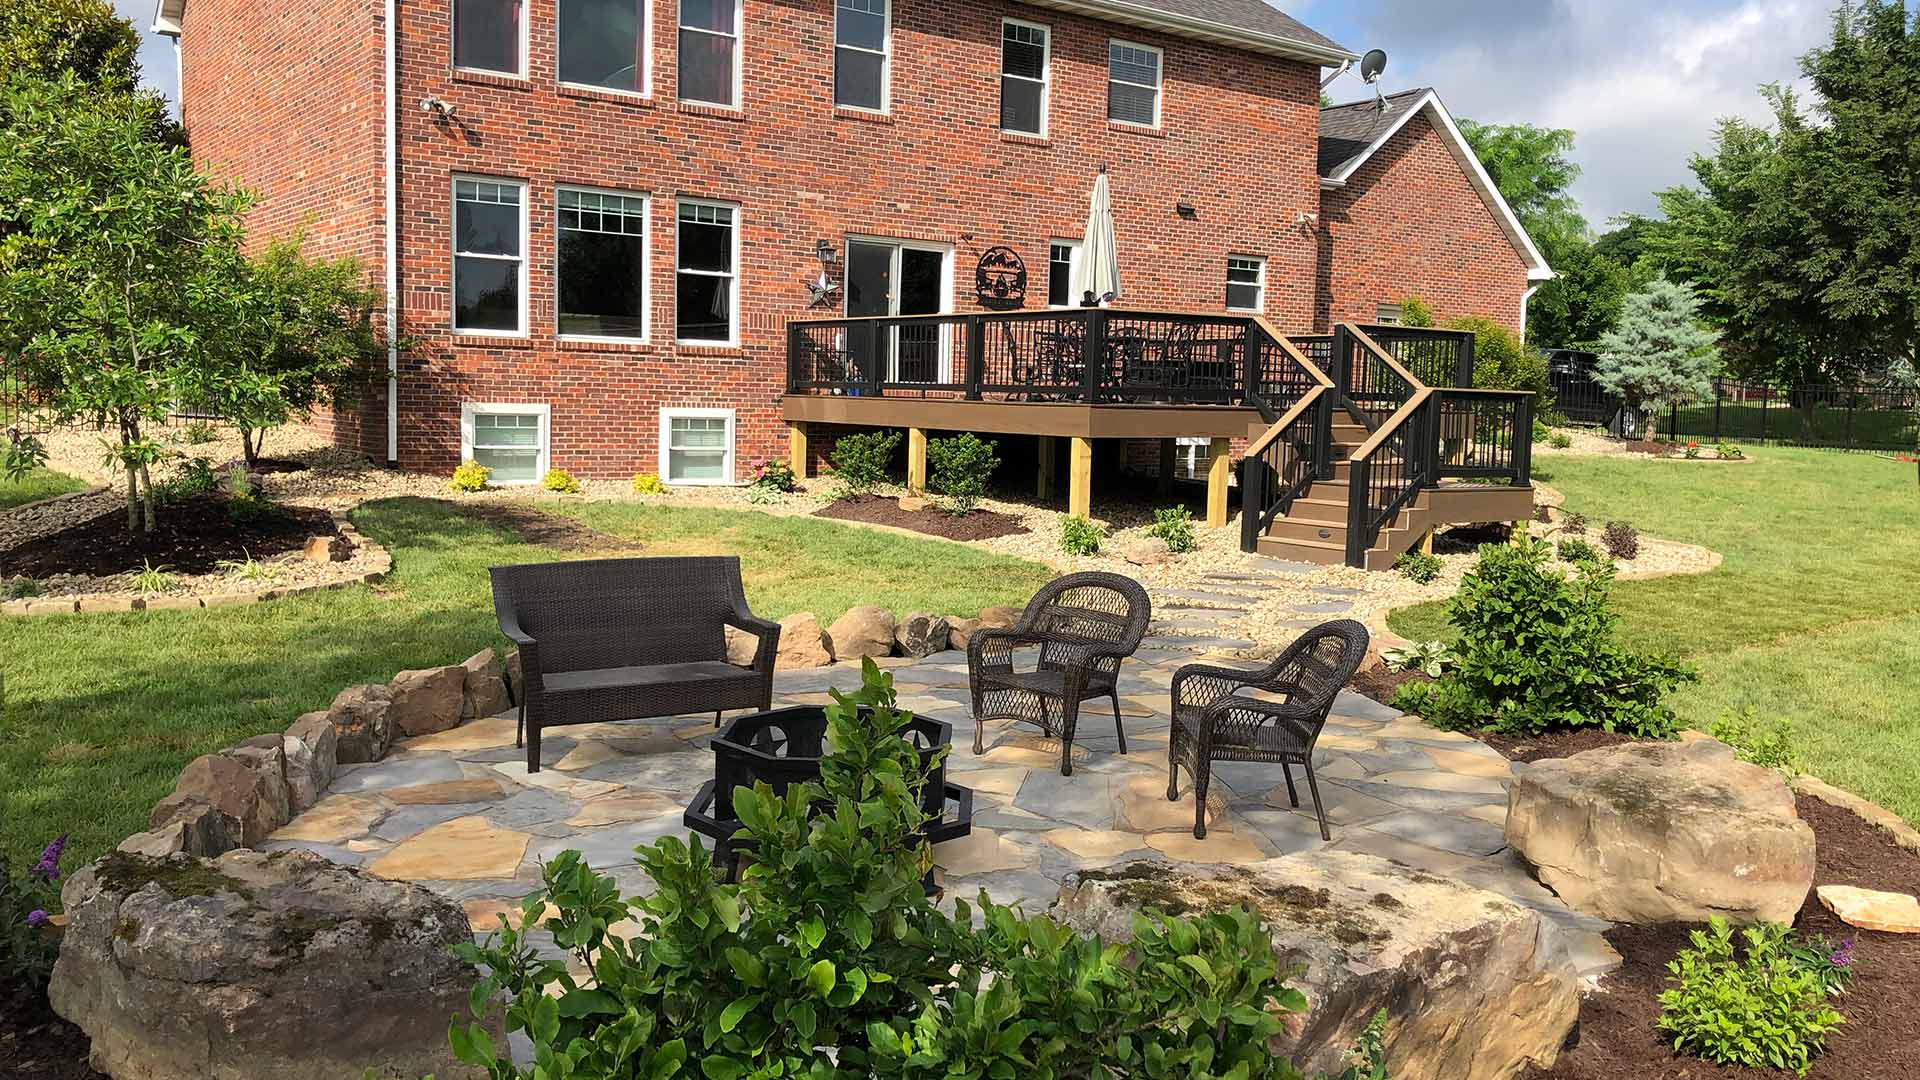 A backyard in Grafton, IL consisting of a recently constructed patio and walkway.